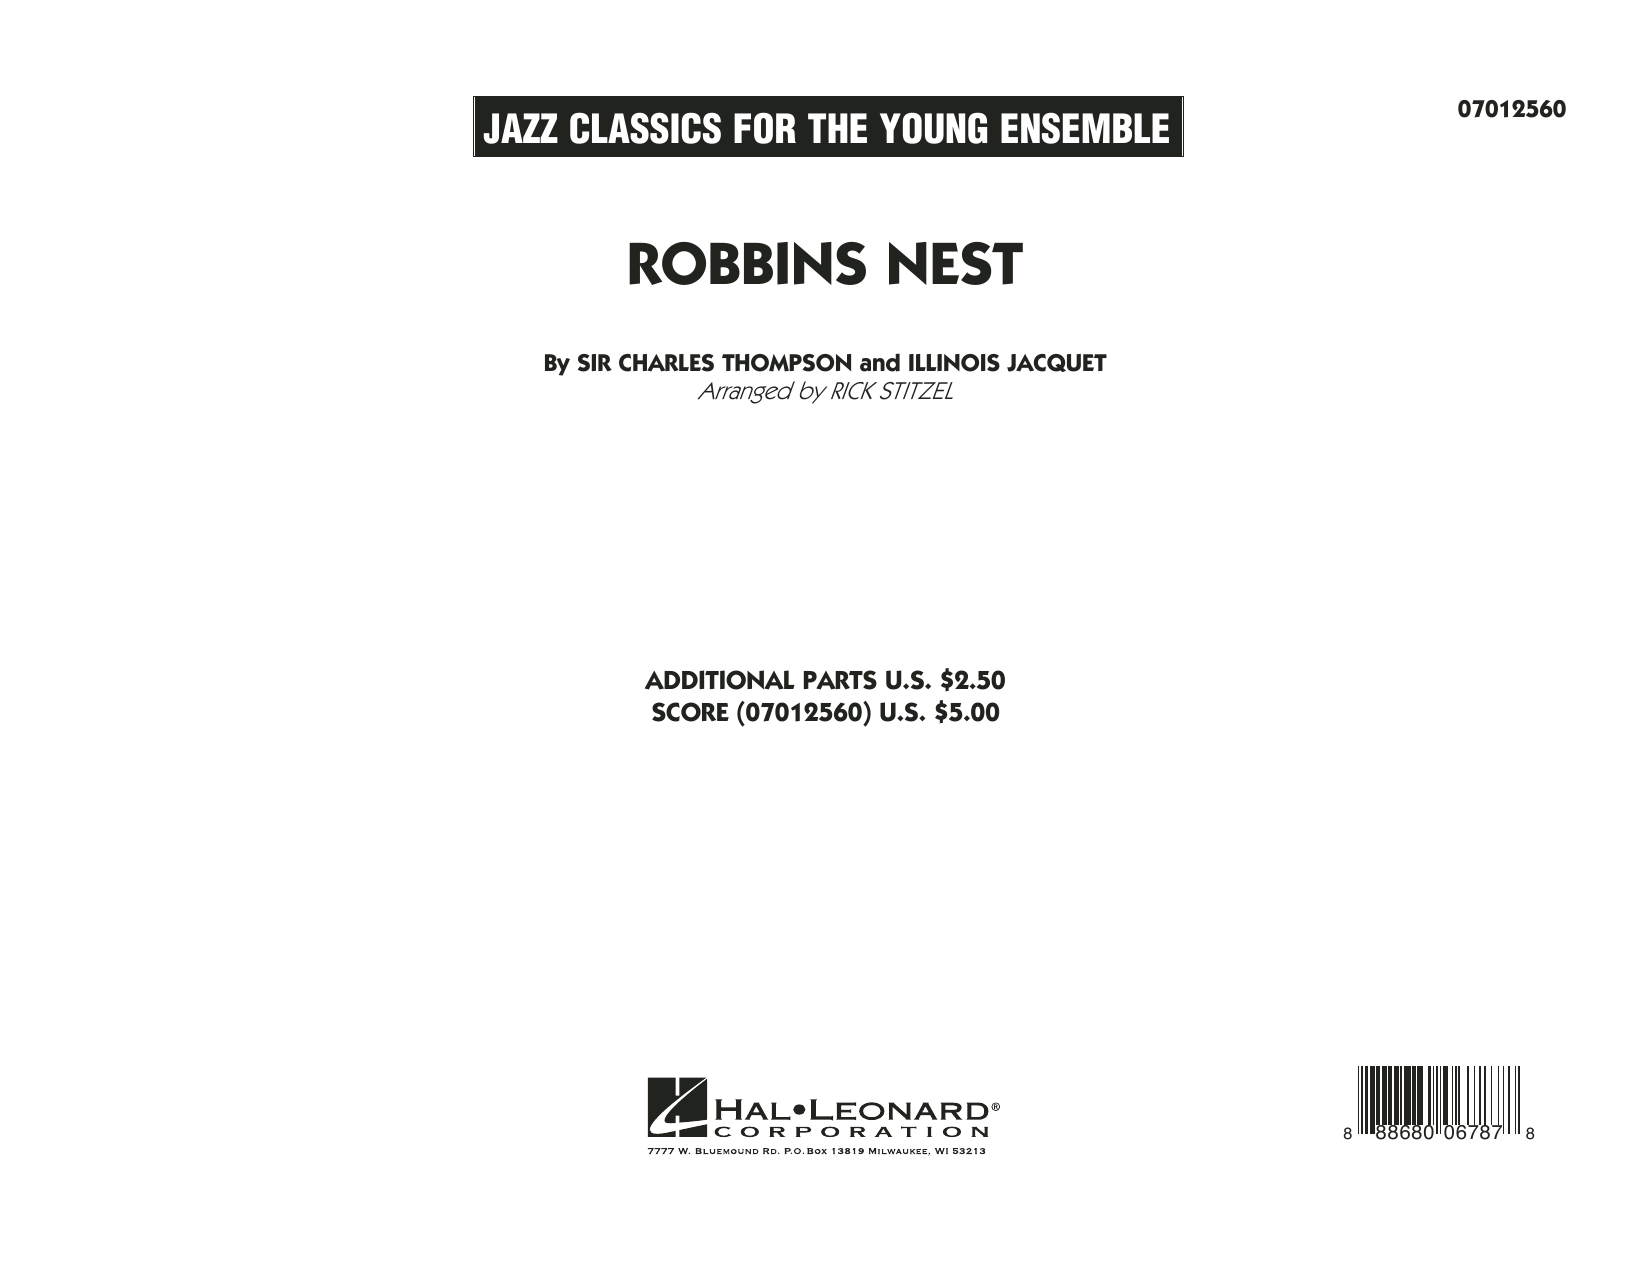 Rick Stitzel Robbins Nest - Conductor Score (Full Score) sheet music notes and chords. Download Printable PDF.